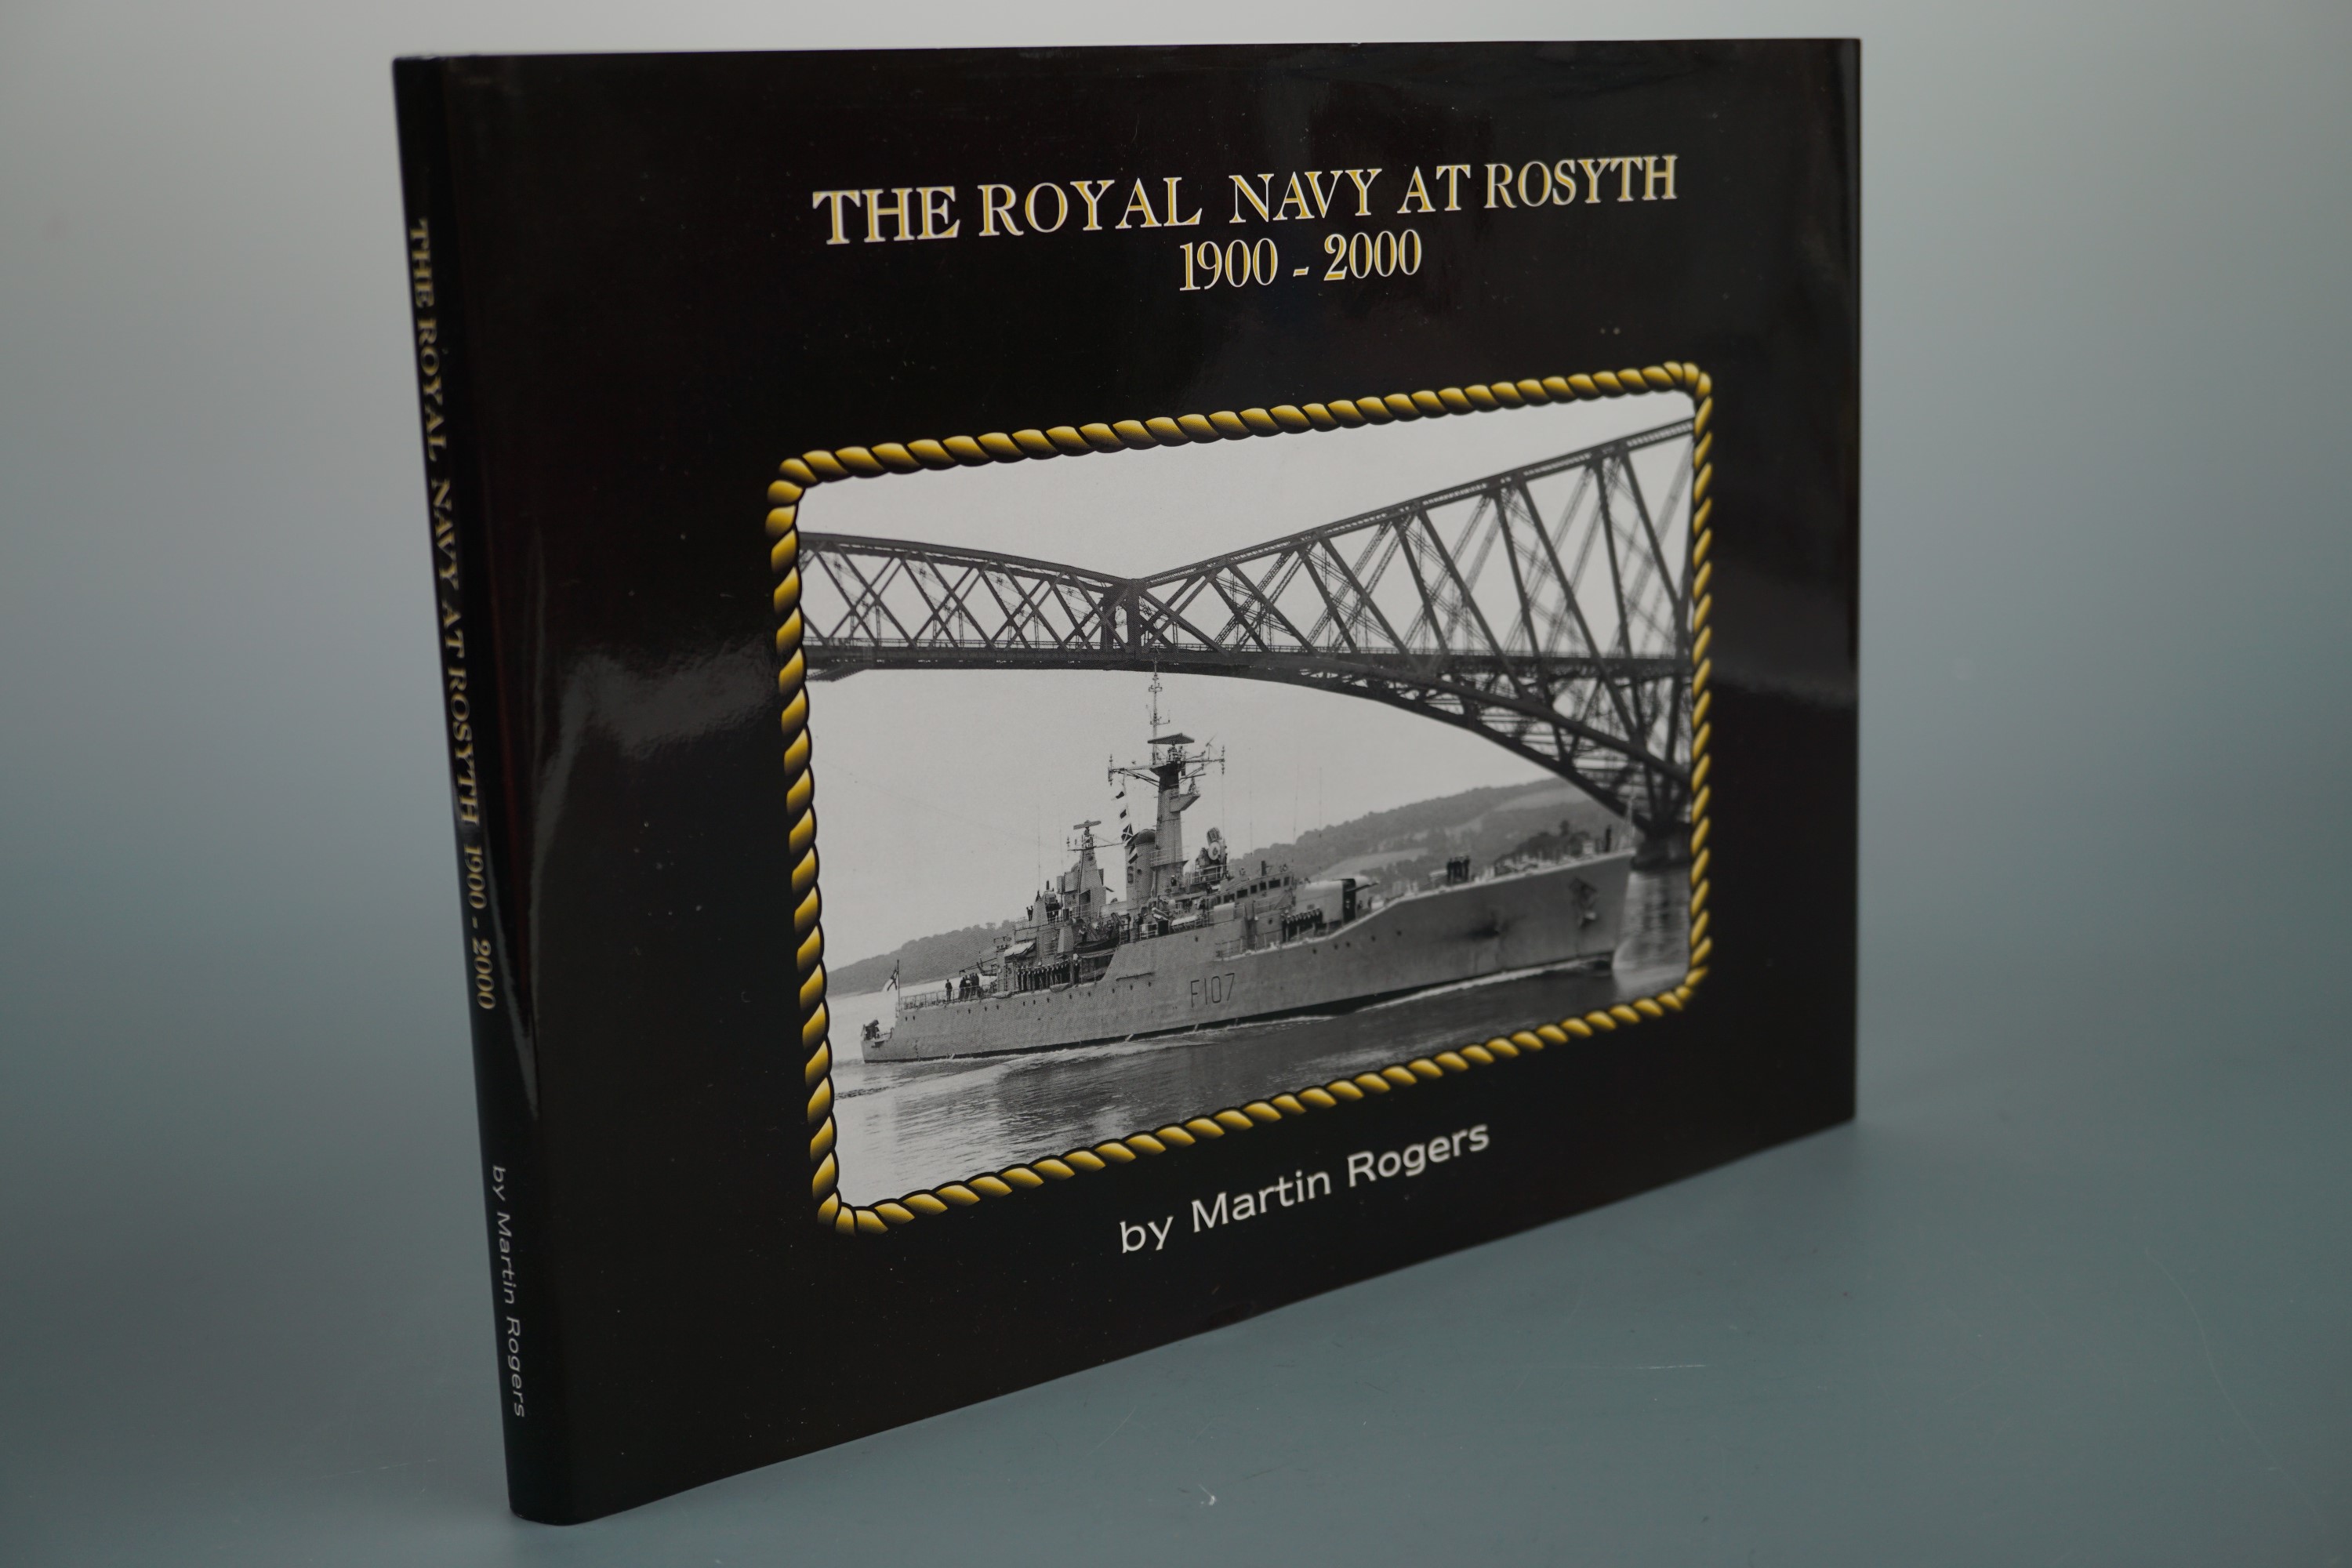 MartinRogers,"The Royal Navy at Rosyth 1900 - 2000", Maritime Books, 2003